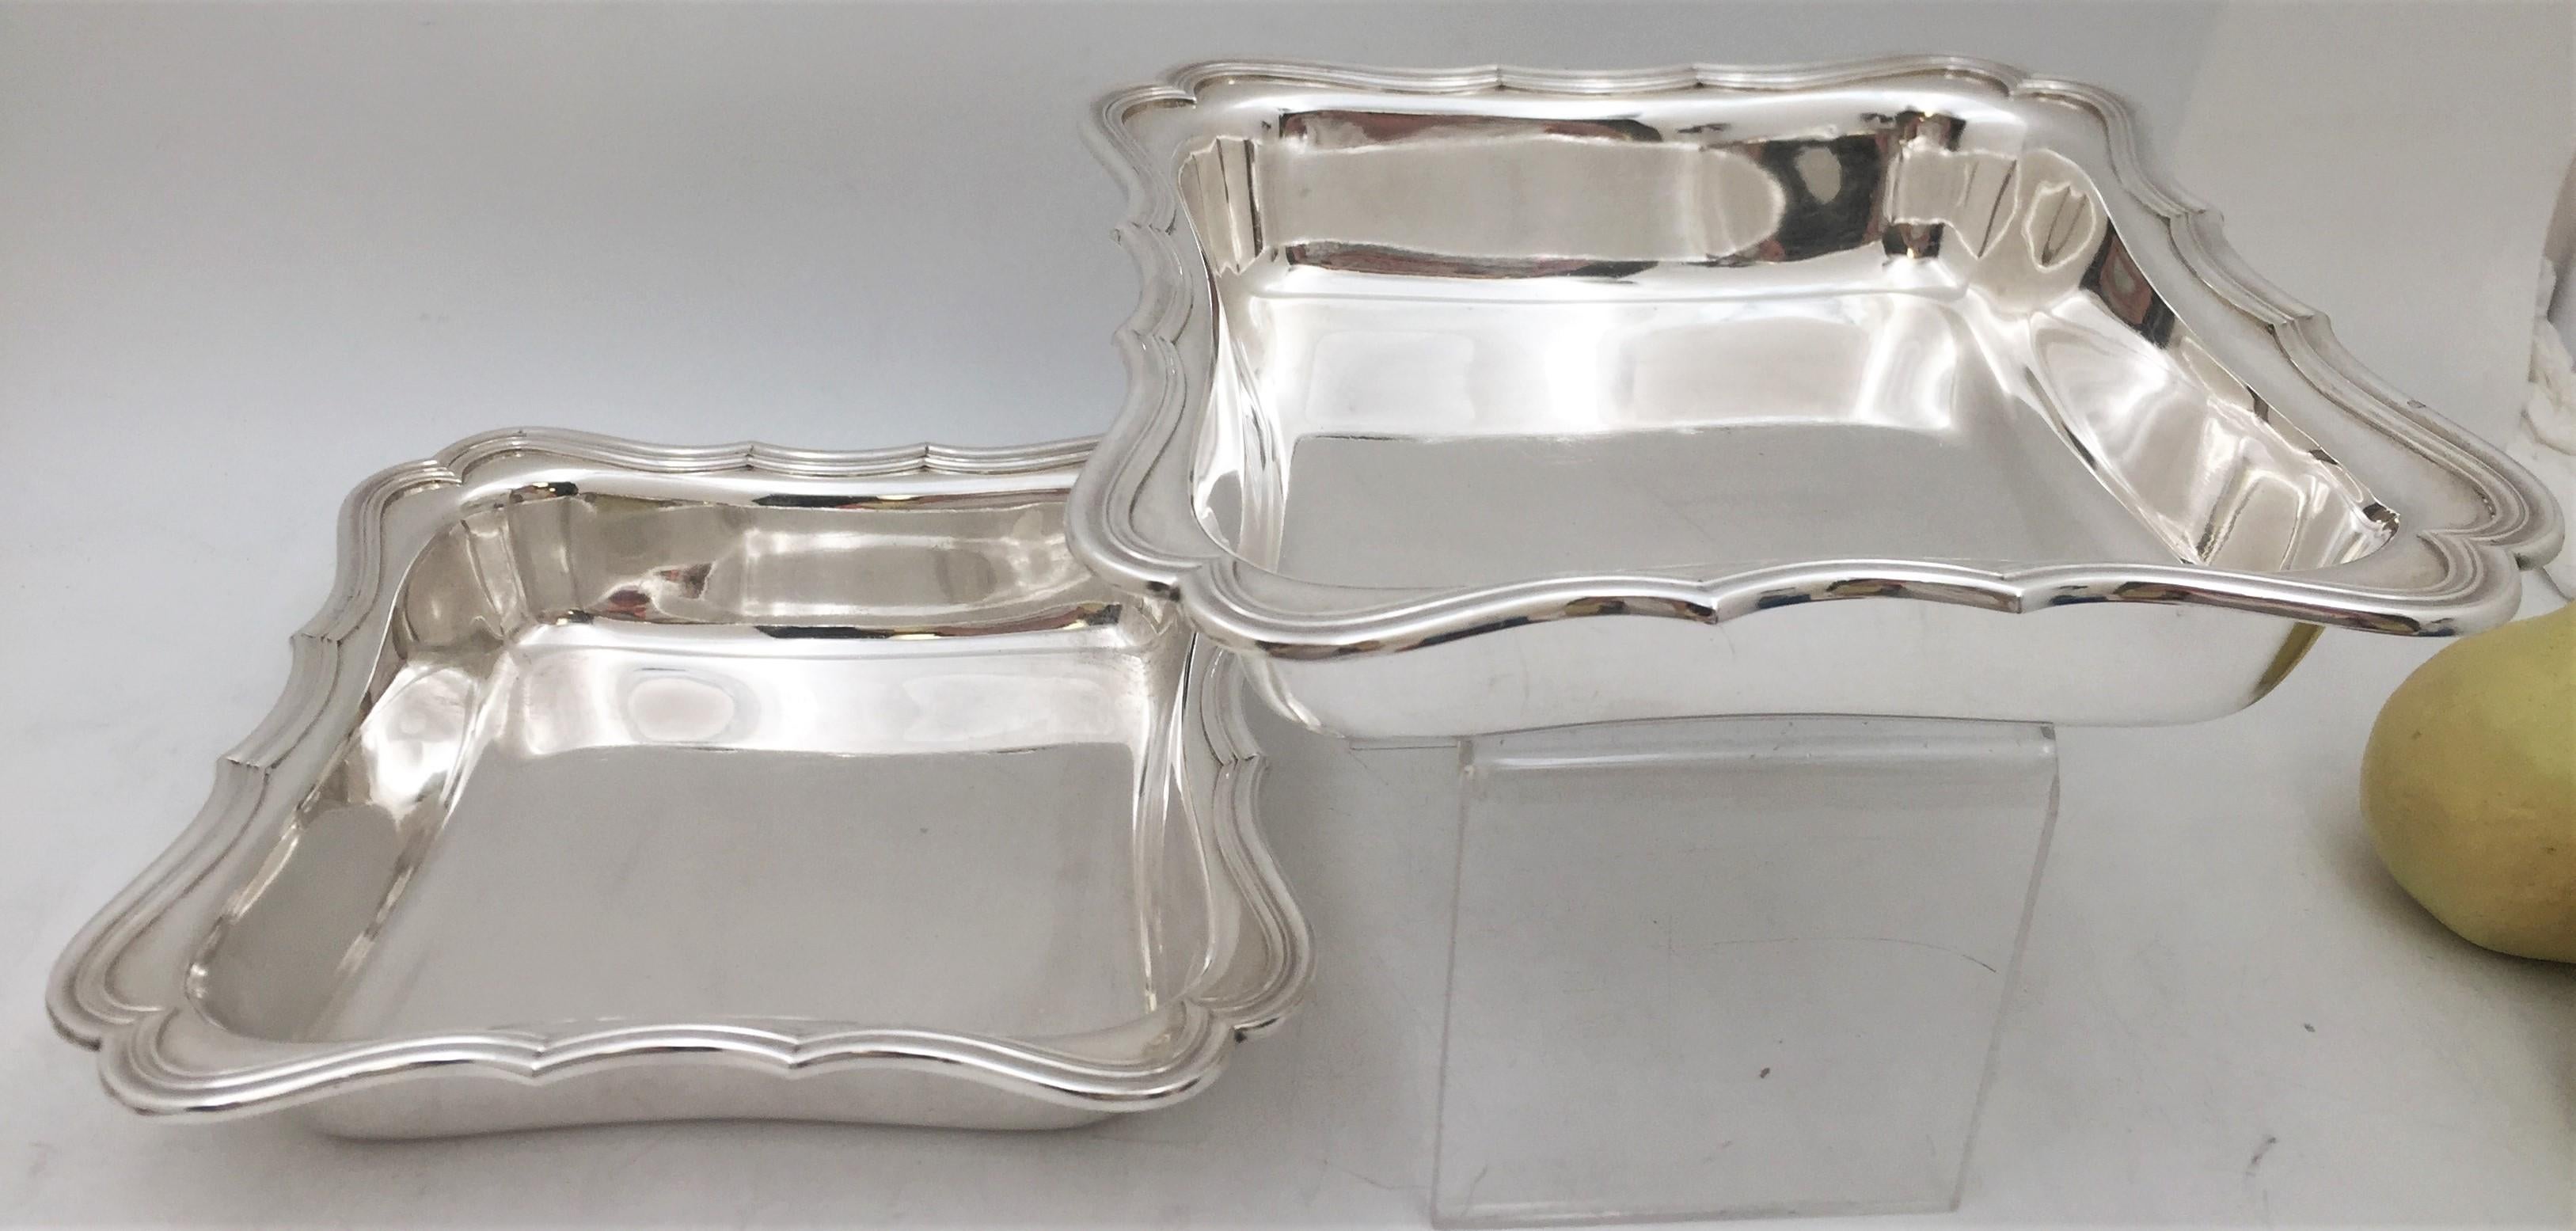 Cardeilhac, French 0.950 (higher purity than sterling!) silver pair of open vegetable bowls in Art Deco style with a beautiful curvilinear design. They measure 9 1/8'' by 9 1/8'' by 1 7/8'' in height. Each bears hallmarks and monograms as shown.